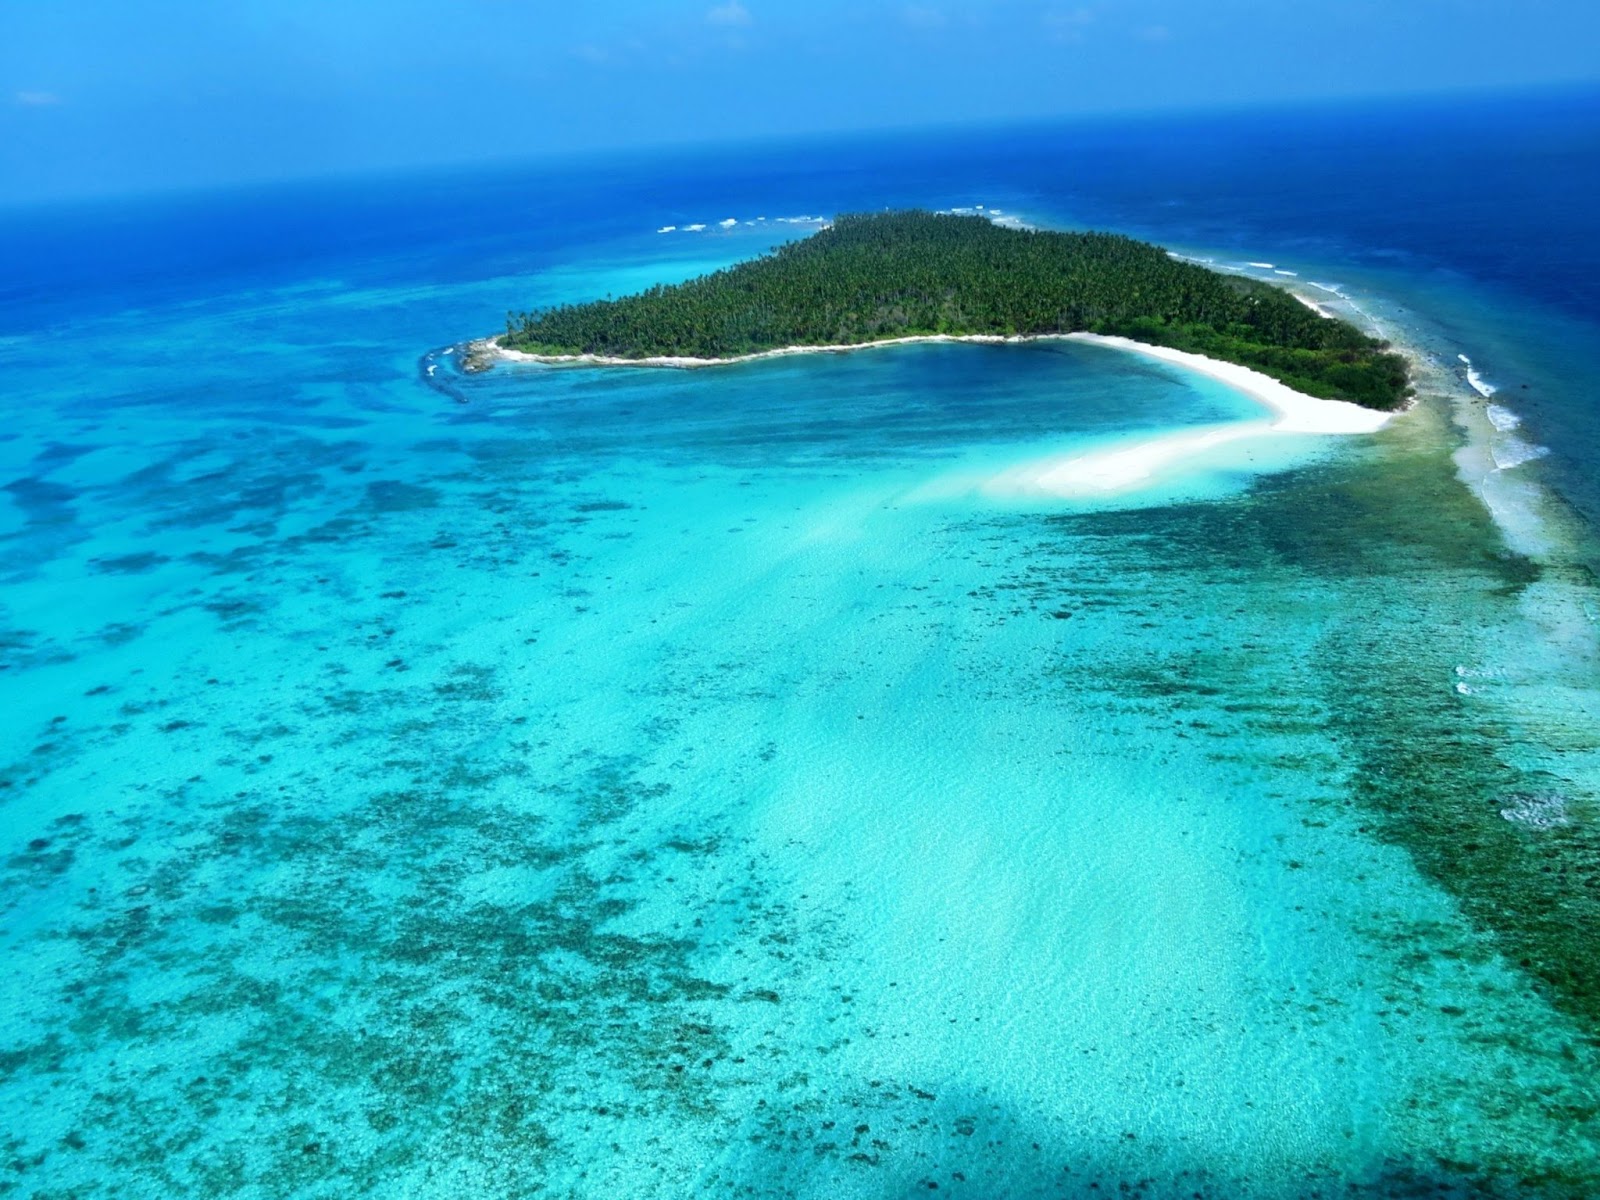 Paradise on Edge: The Maldives vs. Lakshadweep - A Tale of Turquoise Waters and Troubled Tides